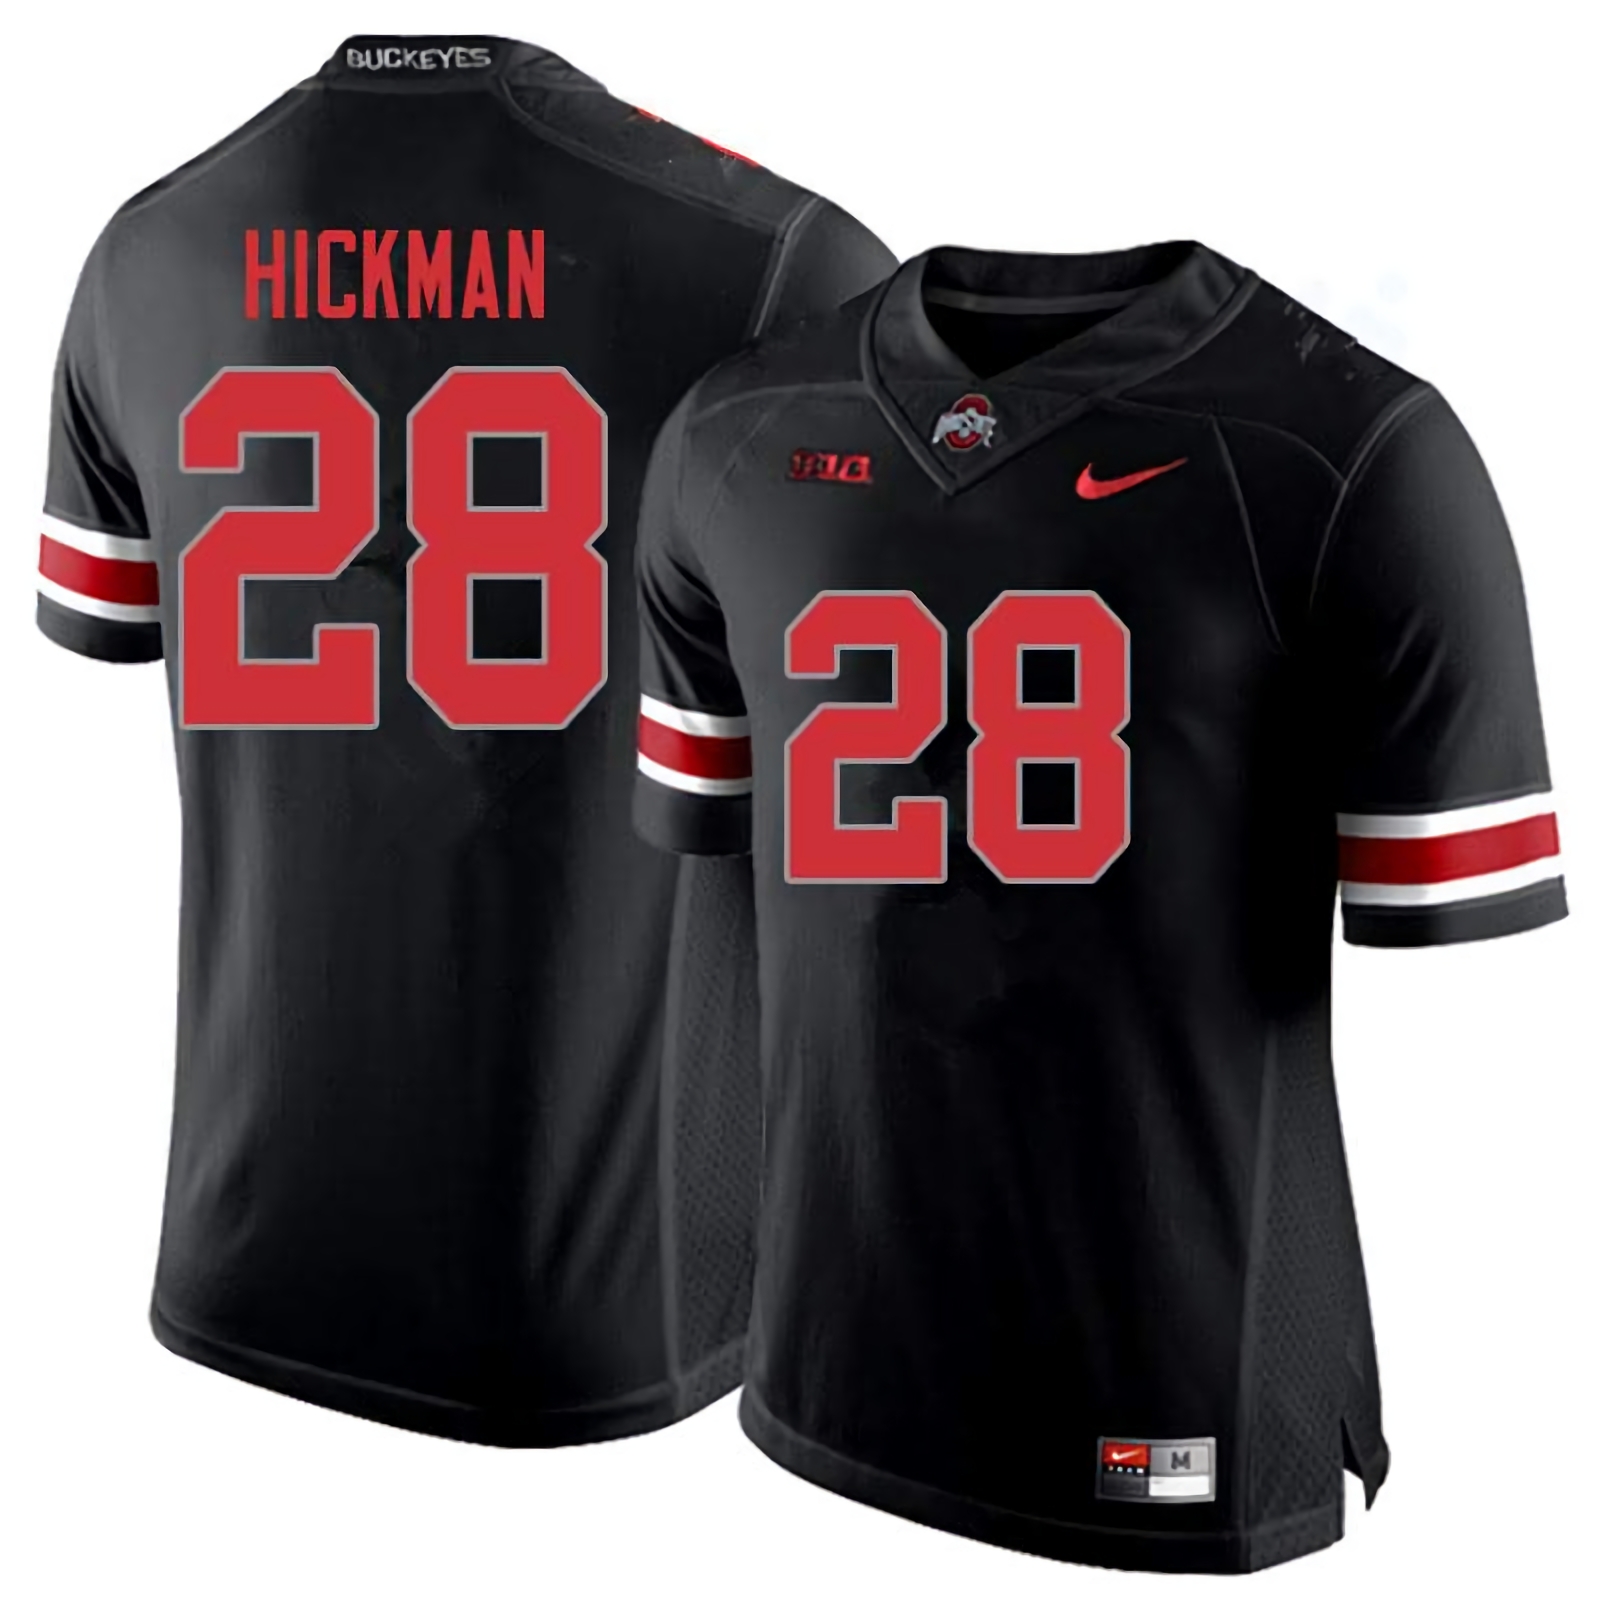 Ronnie Hickman Ohio State Buckeyes Men's NCAA #28 Nike Blackout College Stitched Football Jersey KHN3656QY